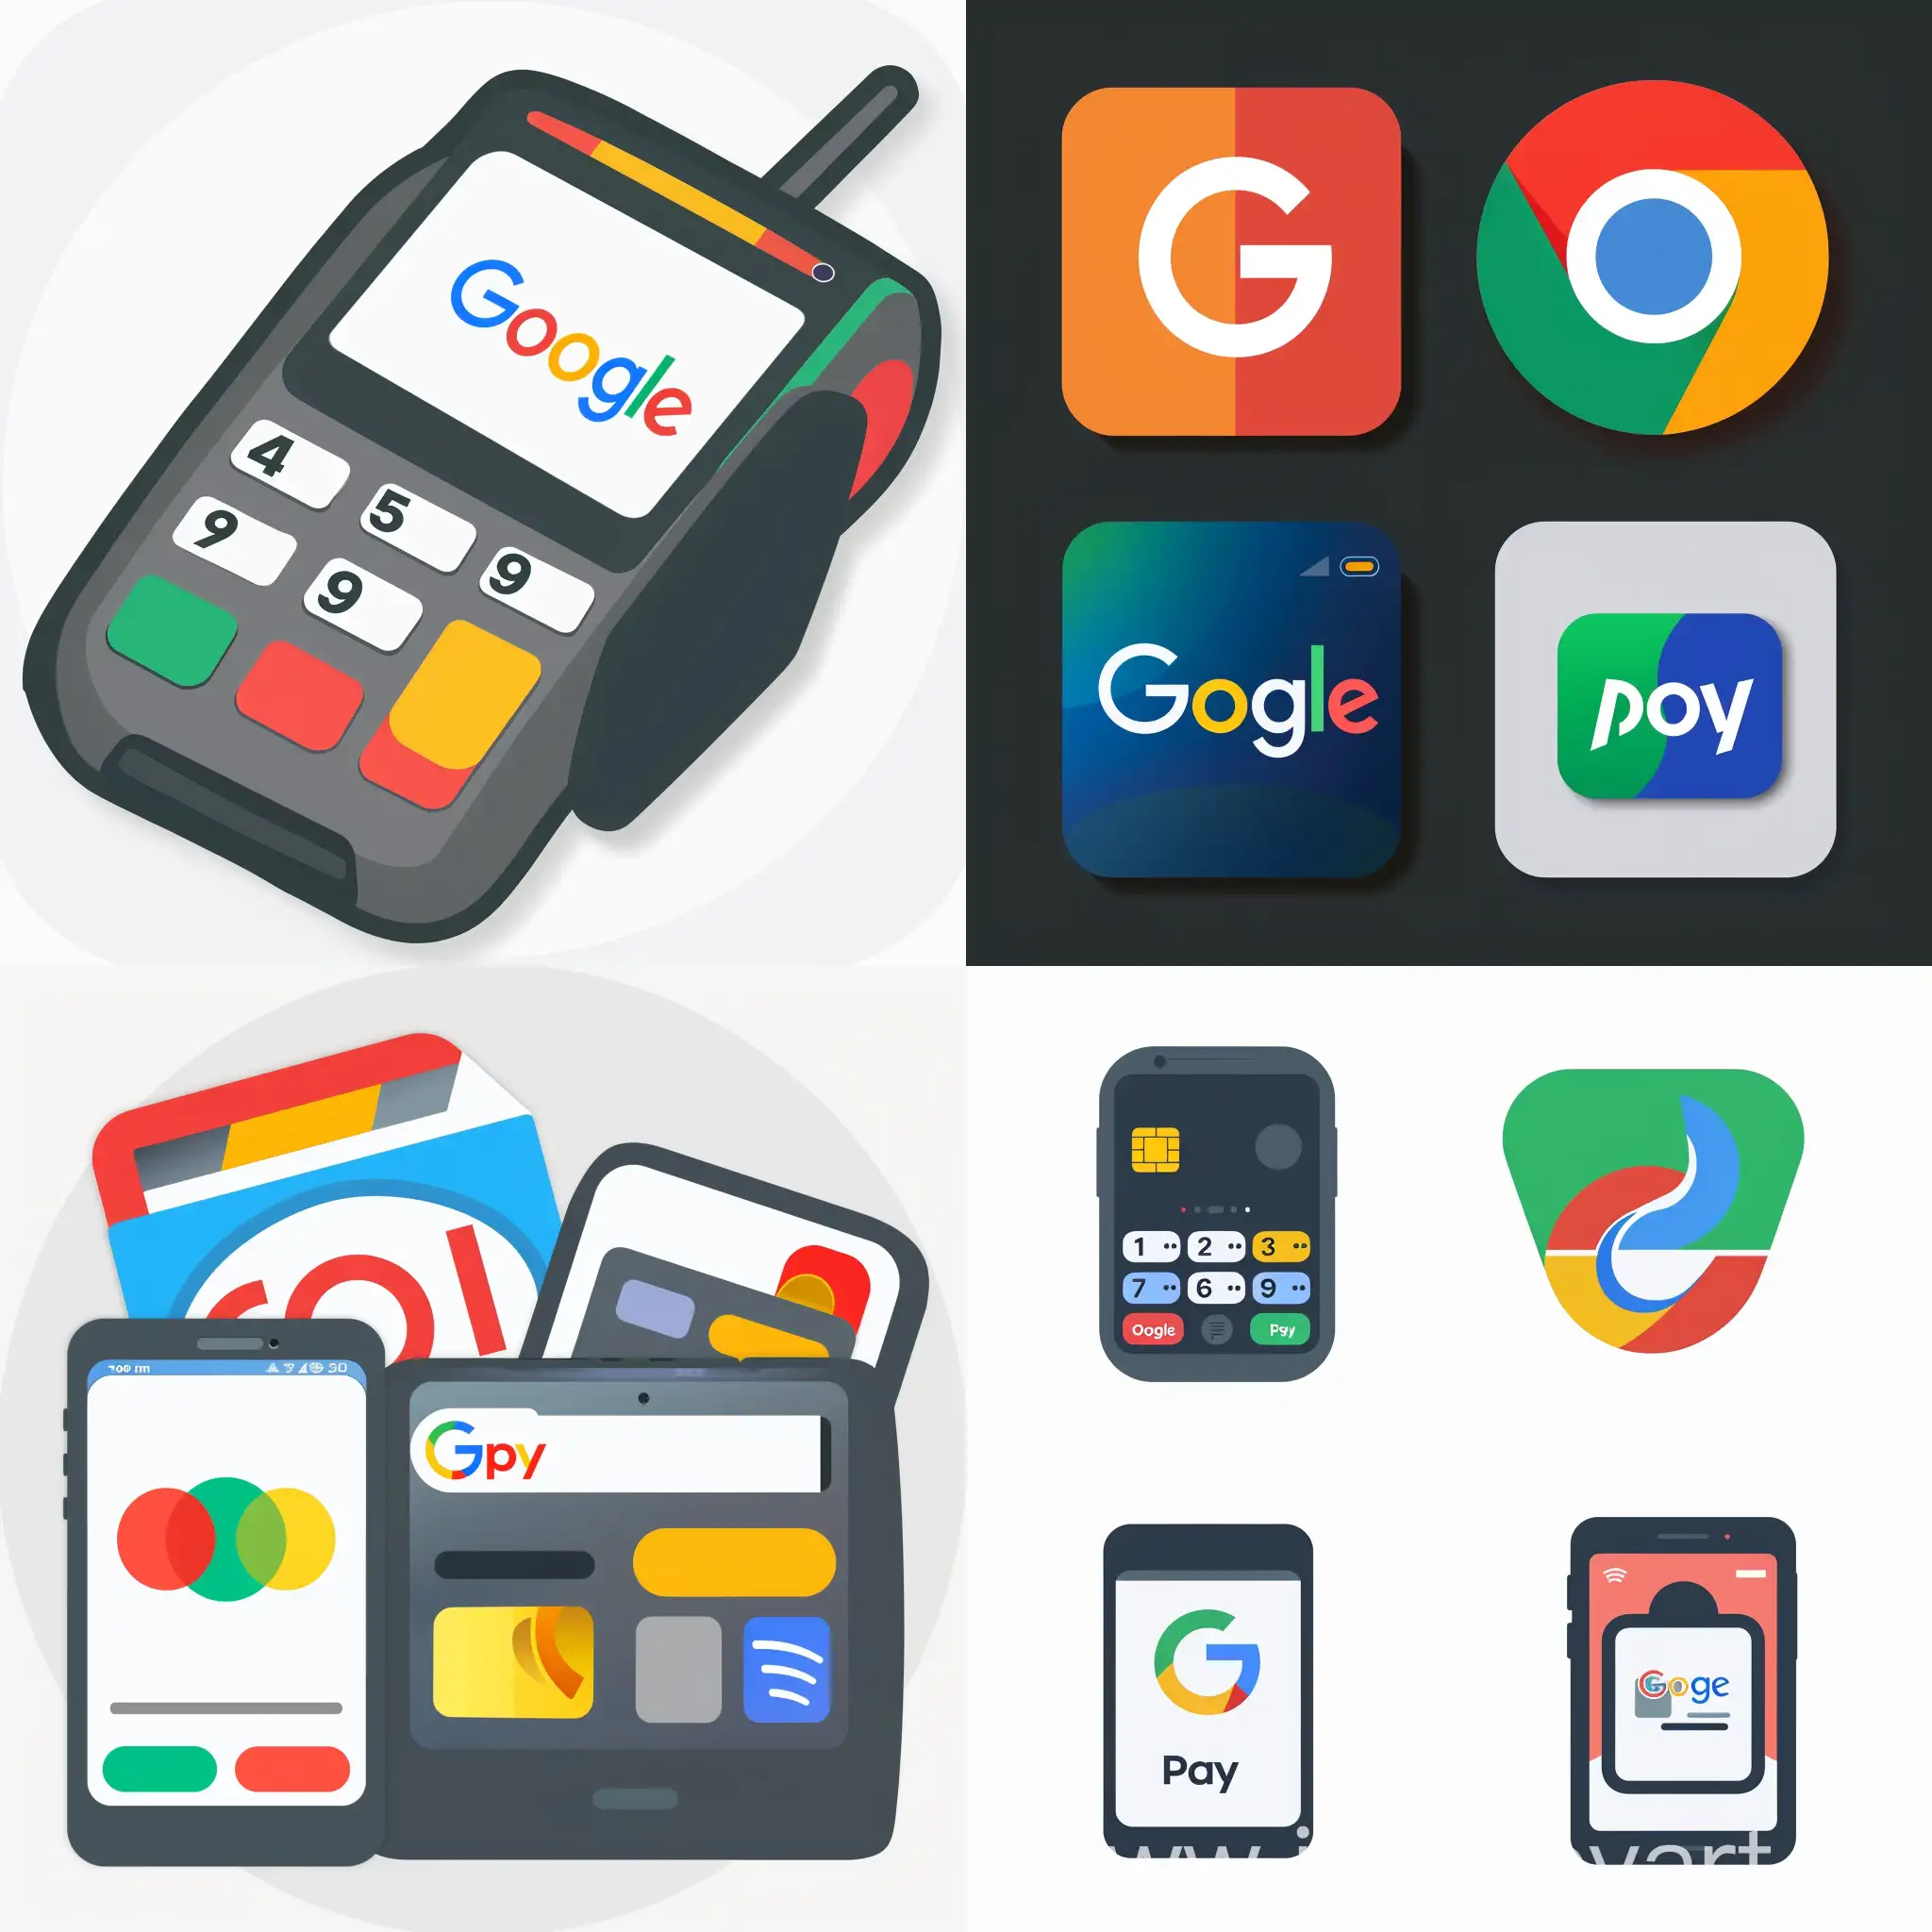 create a logo of google pay and similar payments apps together